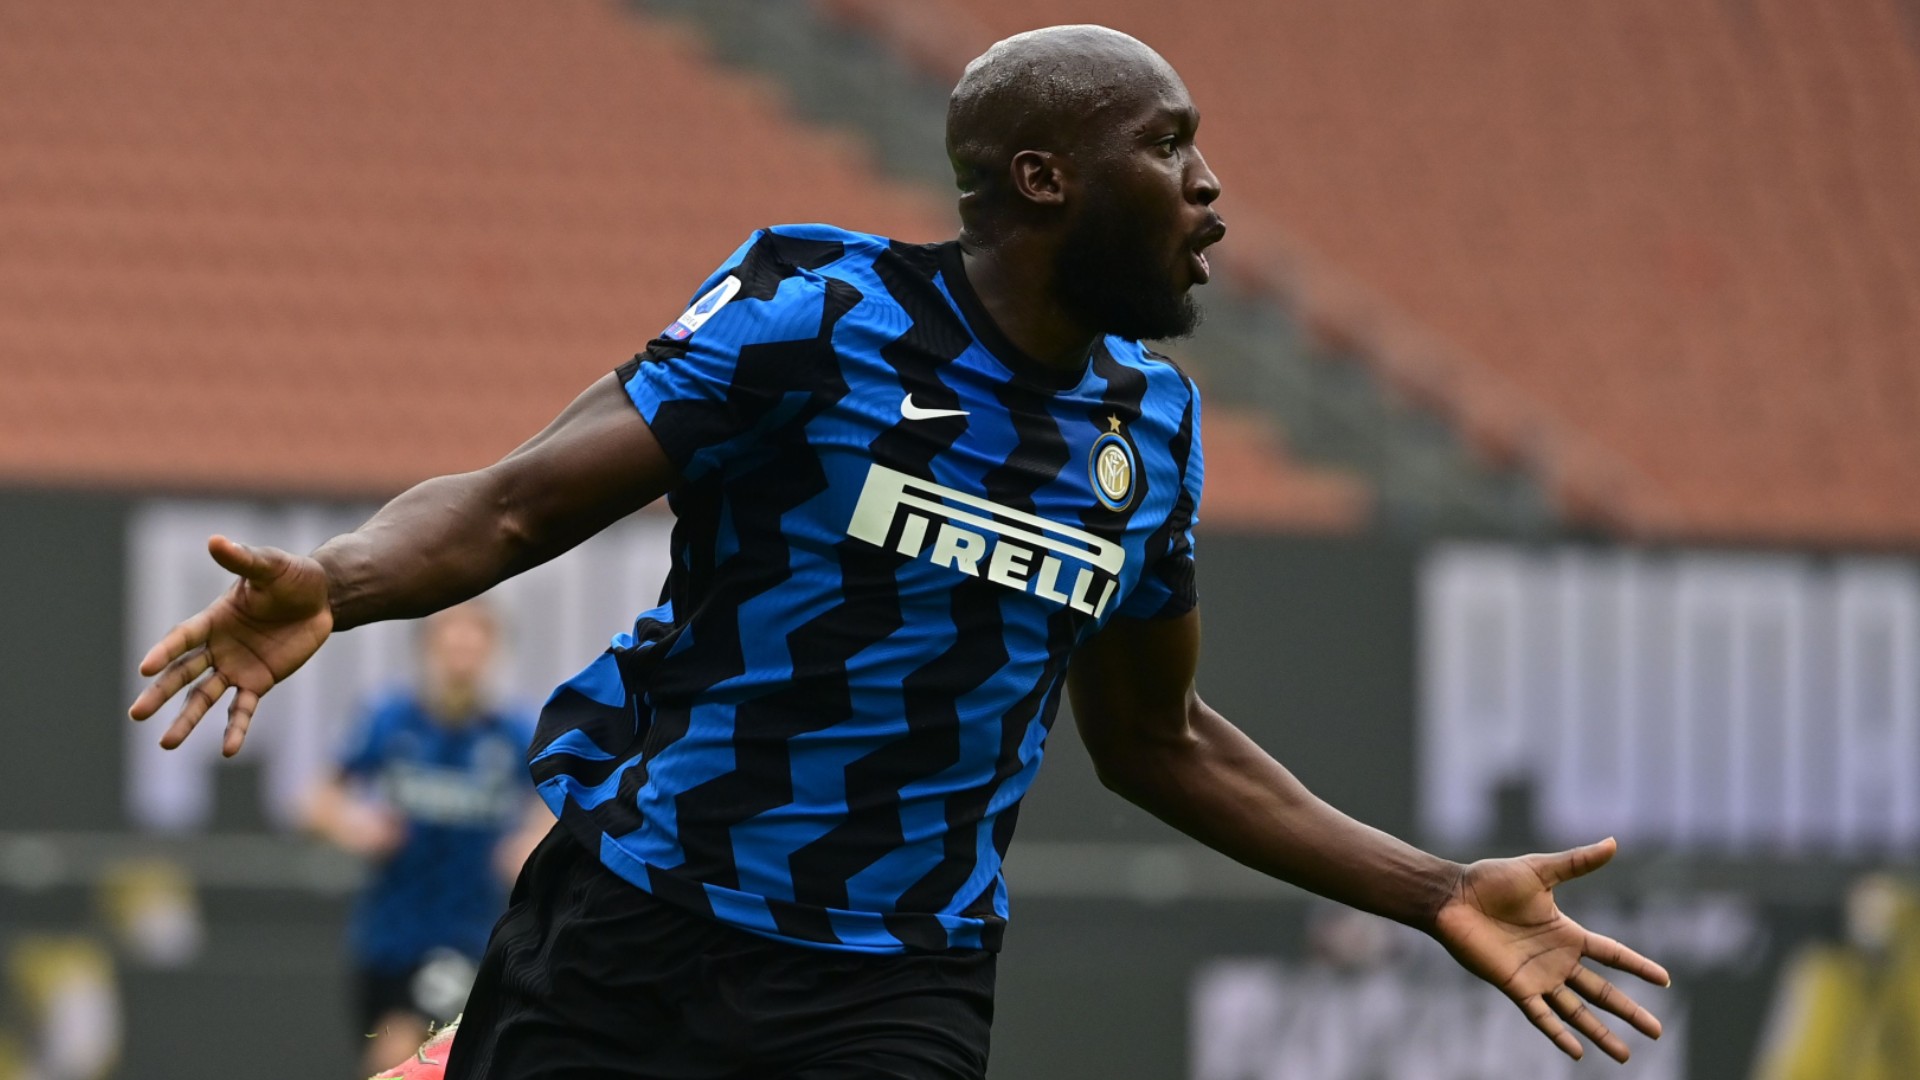 Chelsea move for Lukaku sees Inter ultras issue warning to club amid transfer frustrations